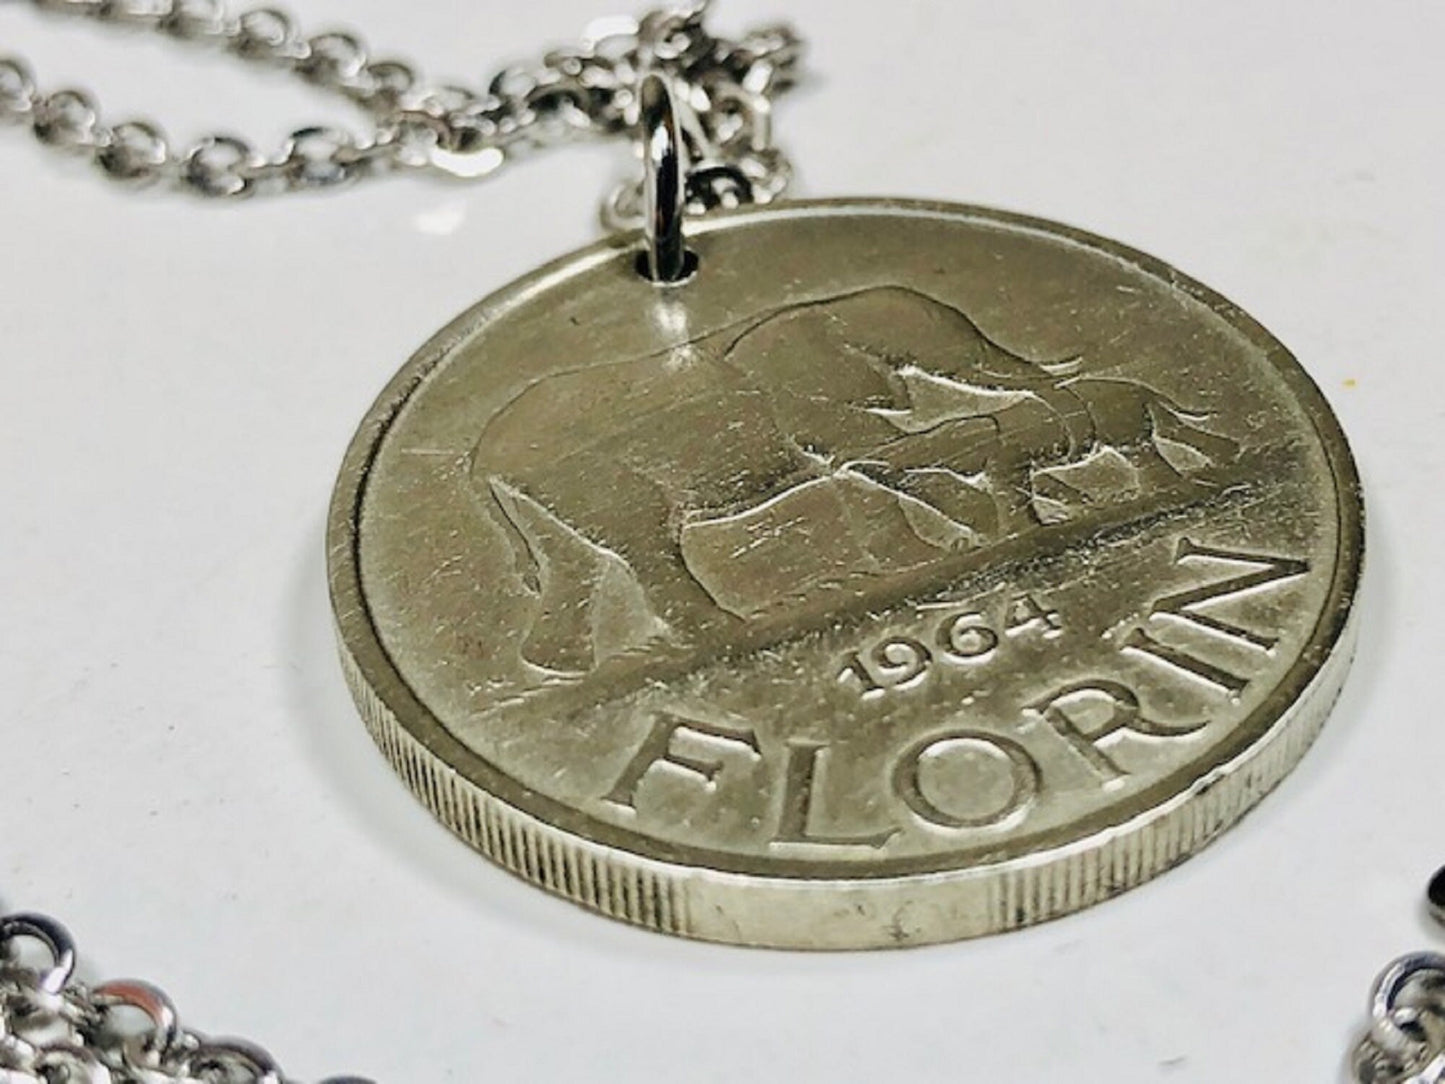 Malawi Coin Necklace 1 Florin 50 Cents African Elephant Calf Personal Handmade Jewelry Gift Friend Charm For Him Her World Coin Collector